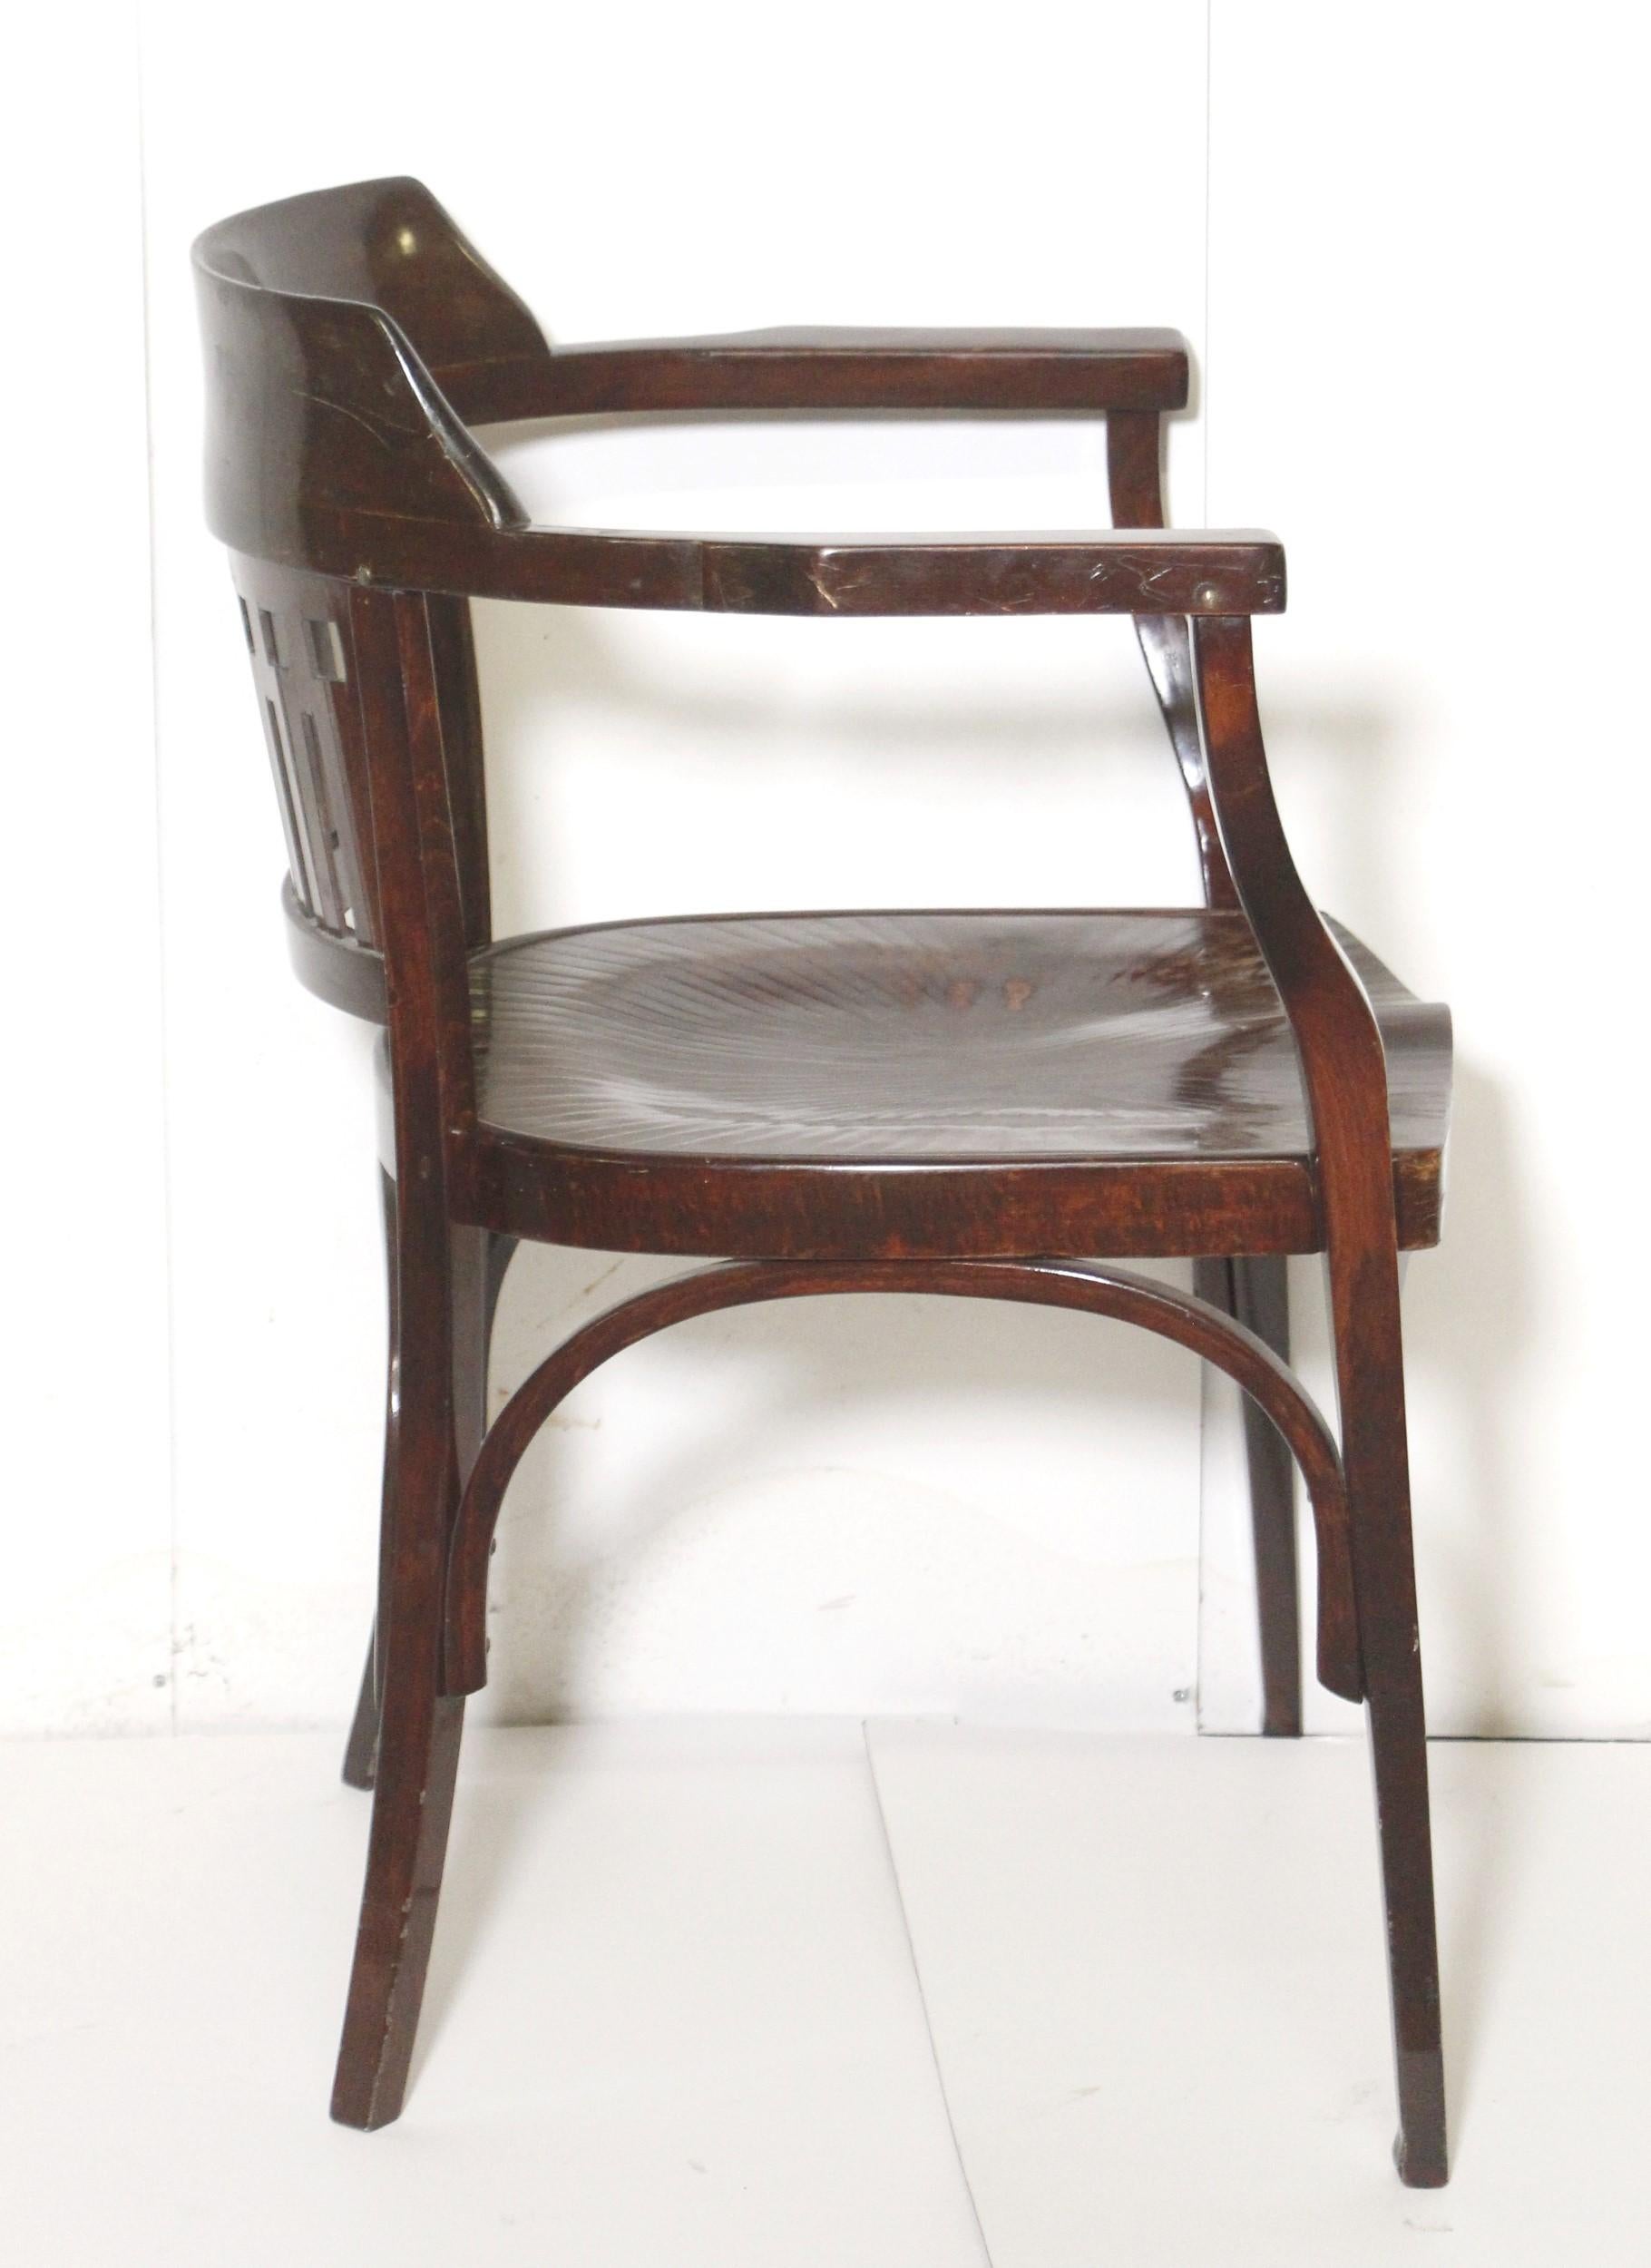 J. J. Kohn Secessionist Bentwood Armchair Designed by Otto Wagner Early 1900s 1